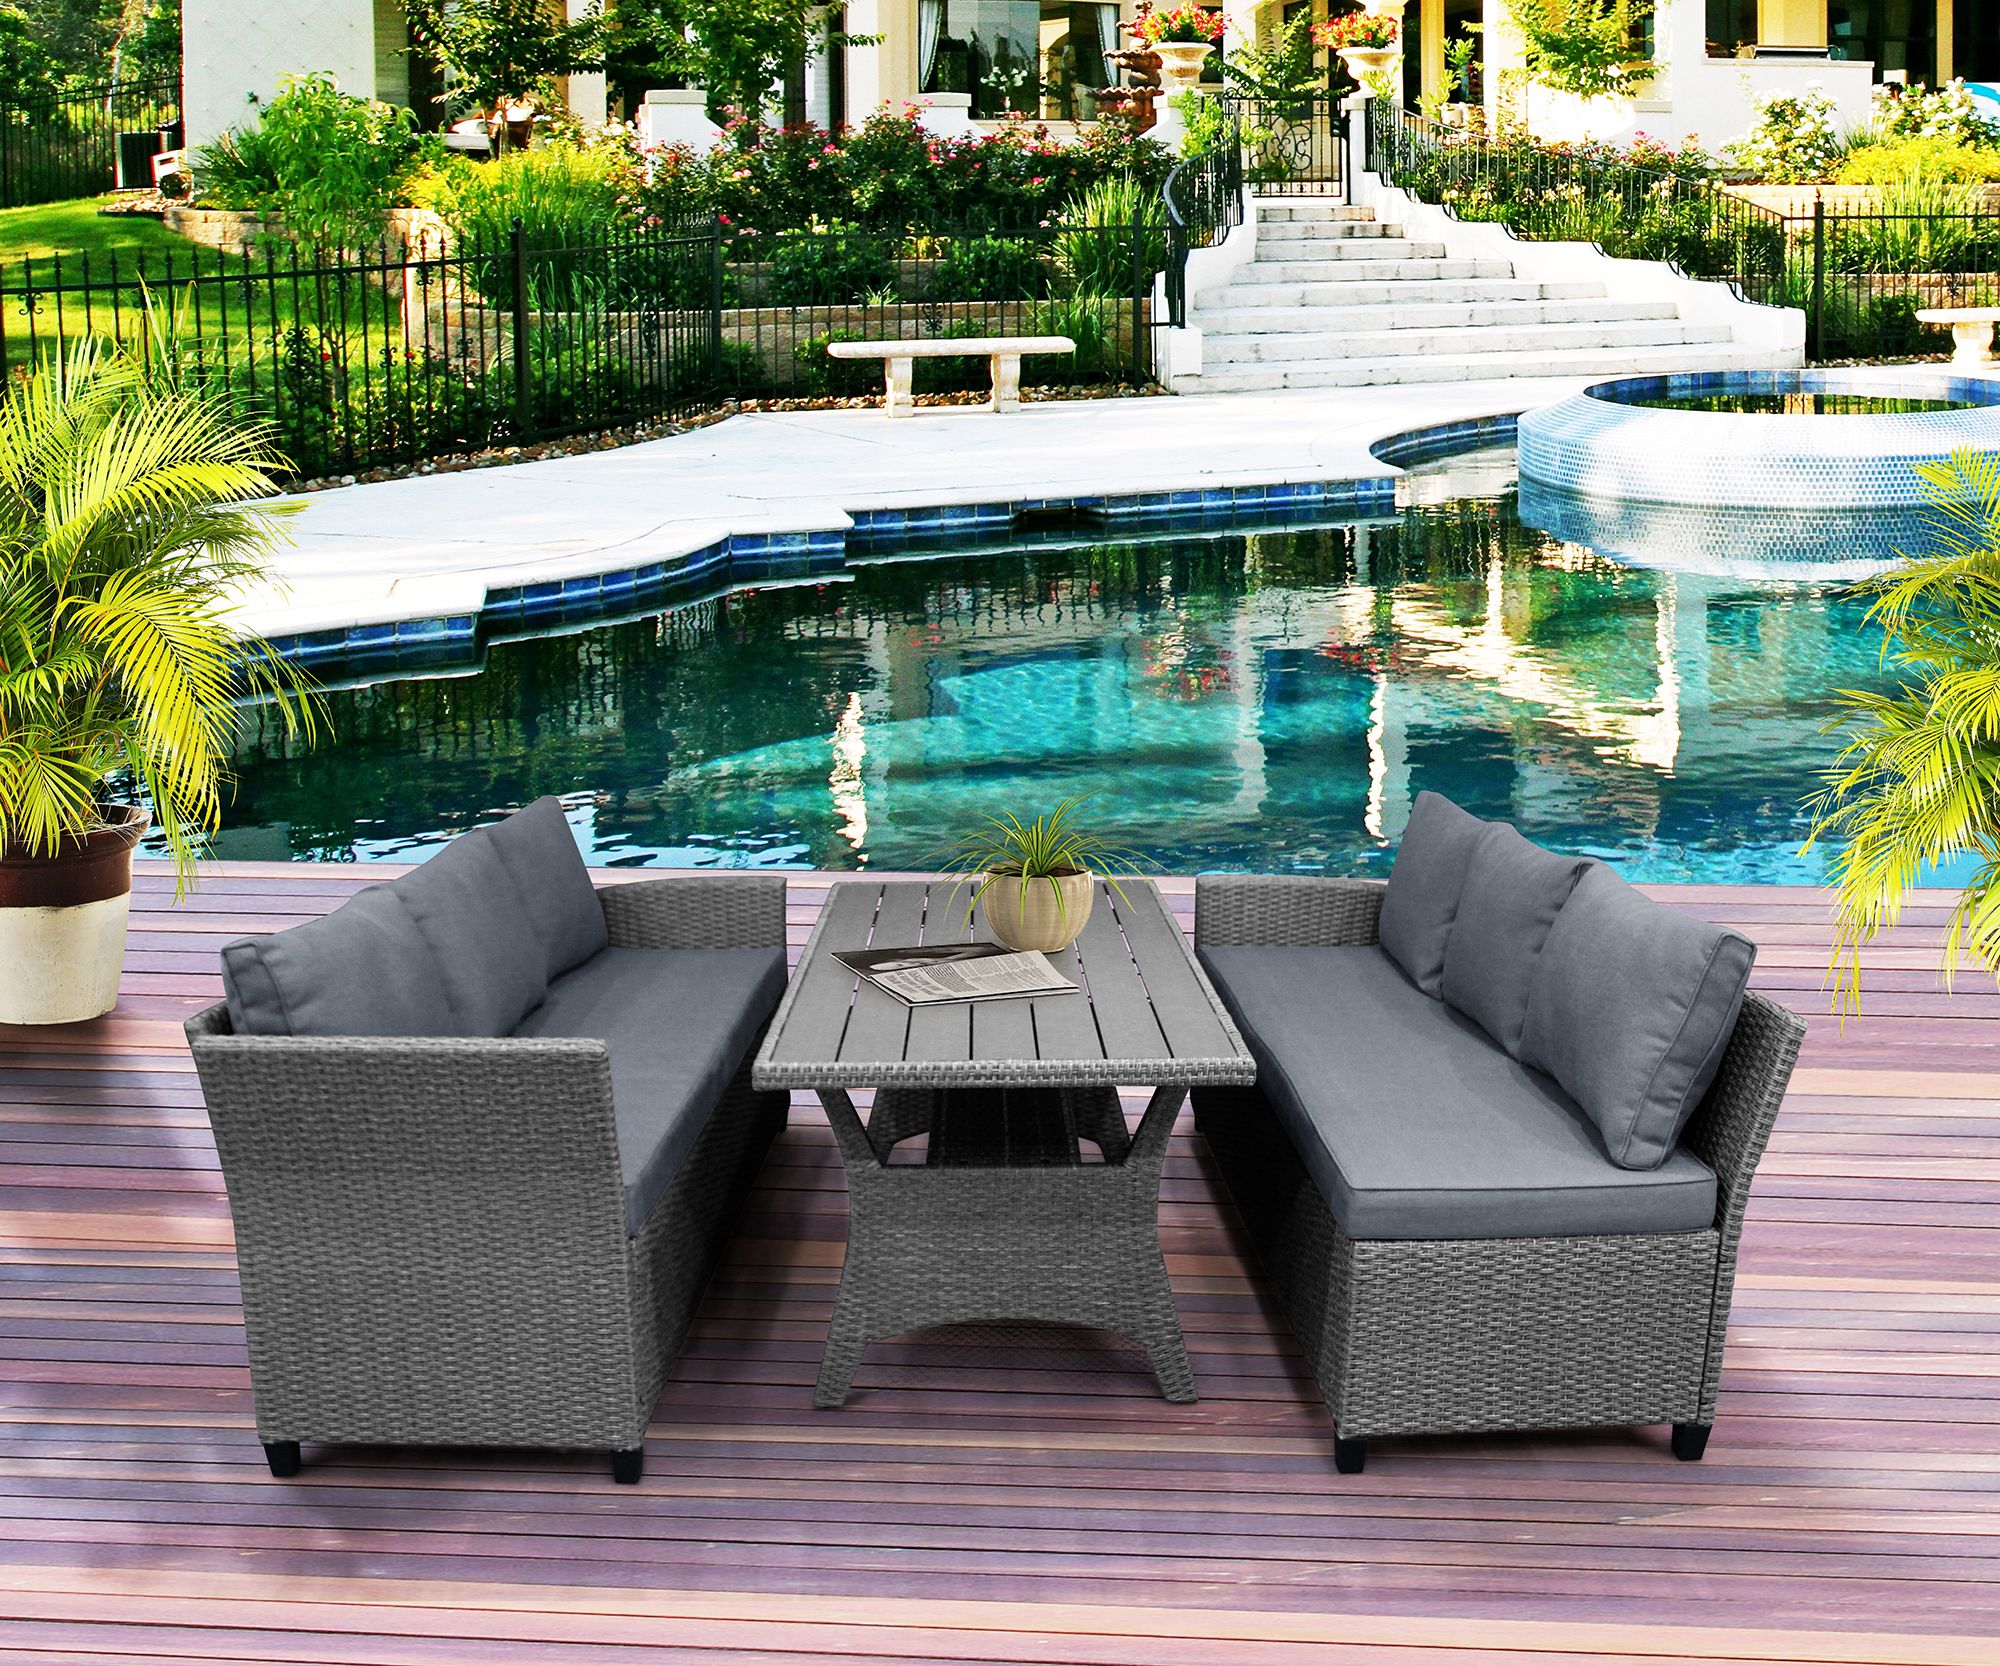 Most Recent Outdoor Seating Sectional Patio Sets In Outdoor Conversation Sofa Set, 3 Piece Patio Sectional Dining Set With (View 5 of 15)